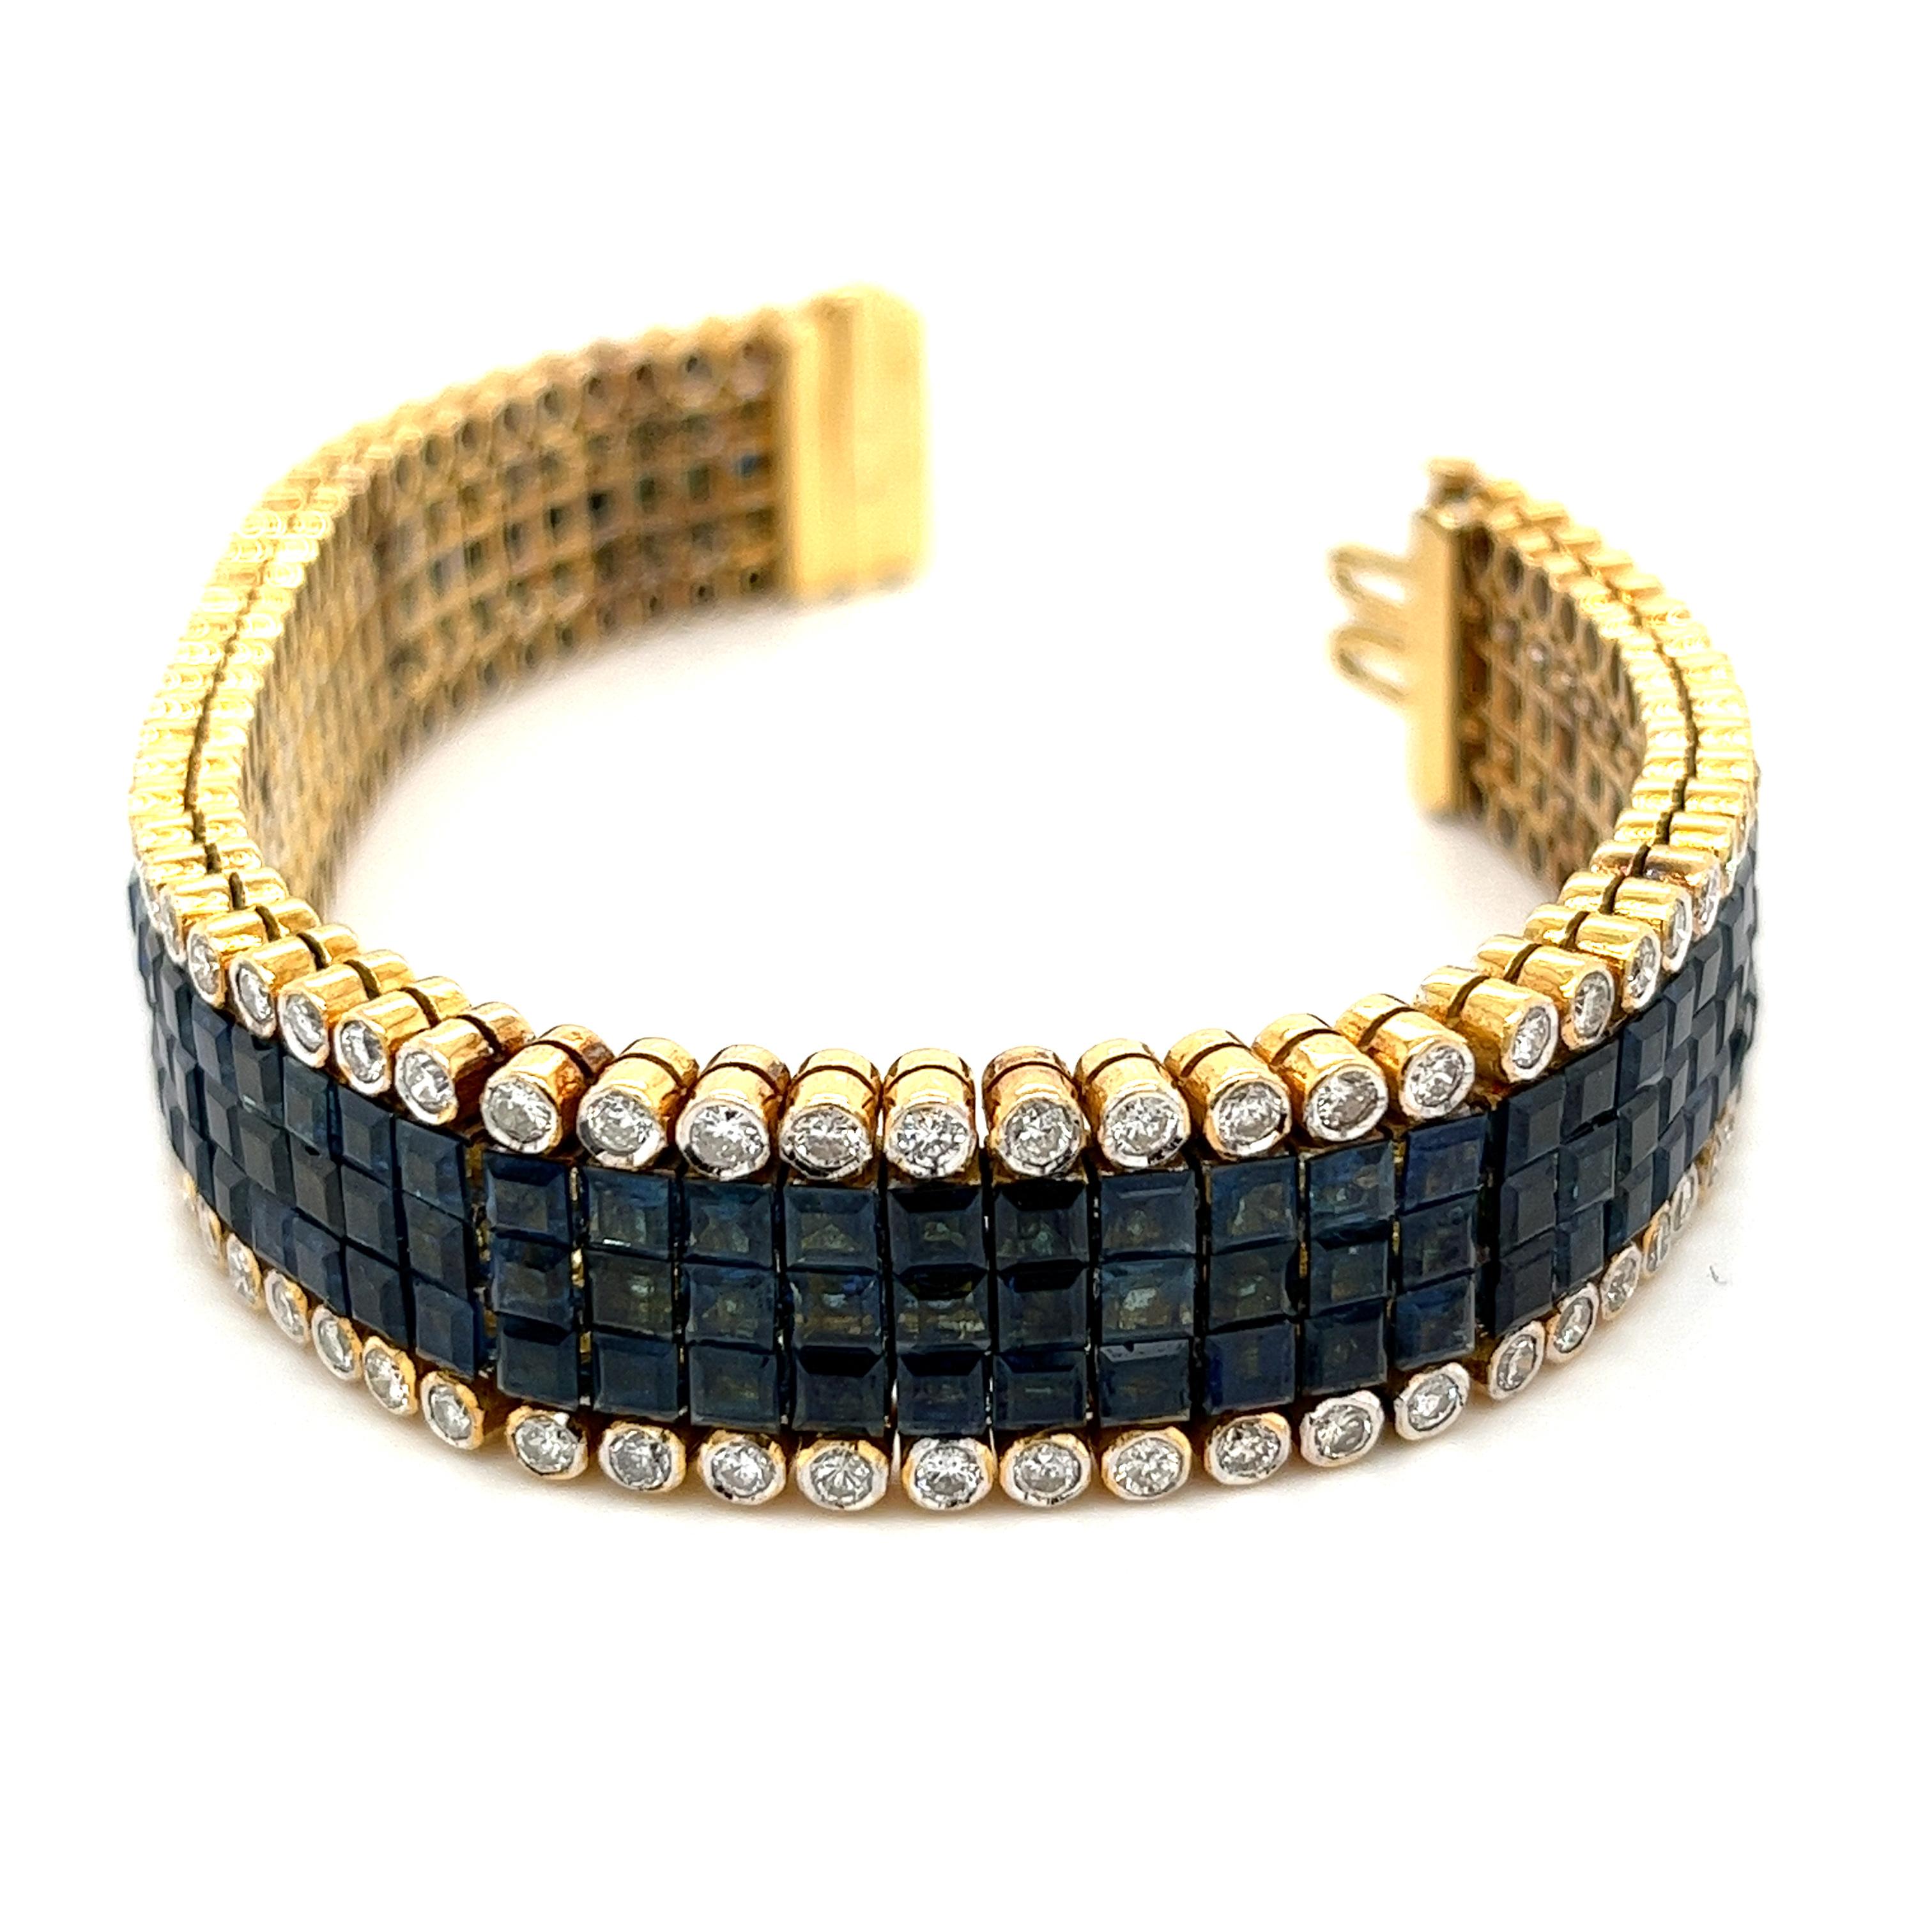 Handmade natural Blue Sapphire and Diamond tennis bracelet. Set in 18k solid gold, hypoallergenic, and a polished finish for long-lasting brilliance and shine. Bracelet is completed by a box clasp and underside safety latch to ensure a secure and